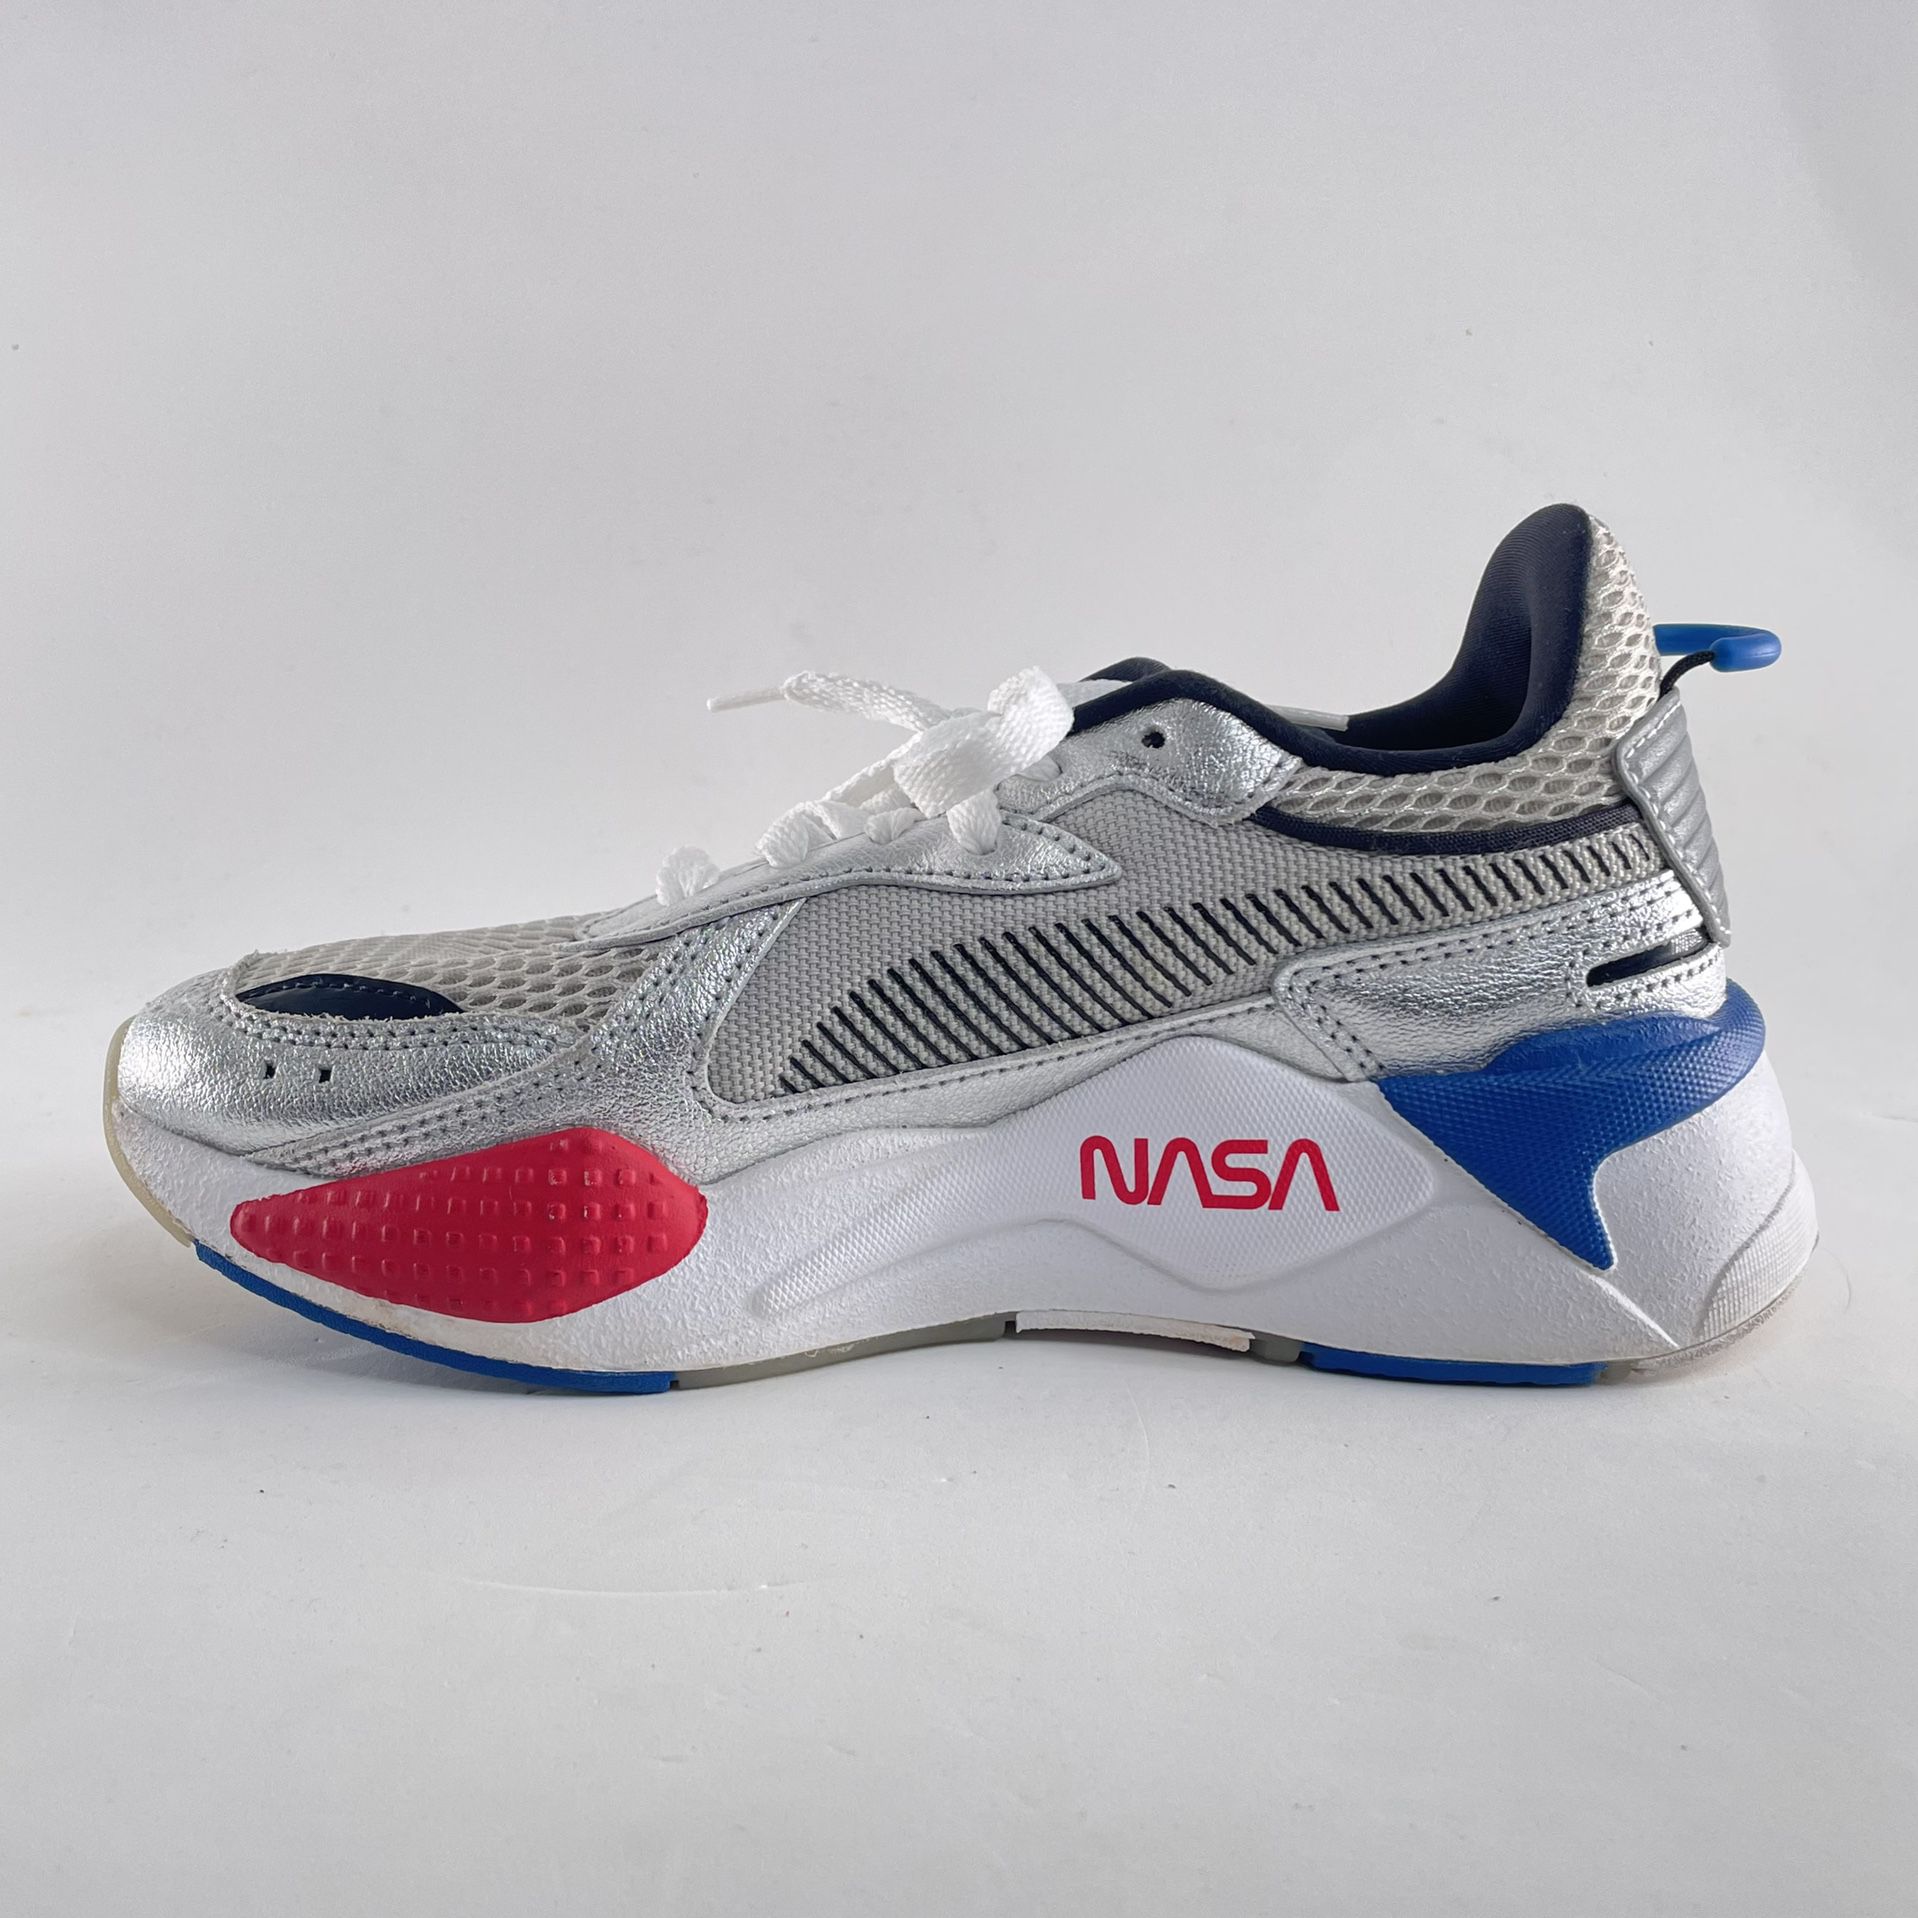 Puma RSX Shoes for Sale Roswell, GA - OfferUp